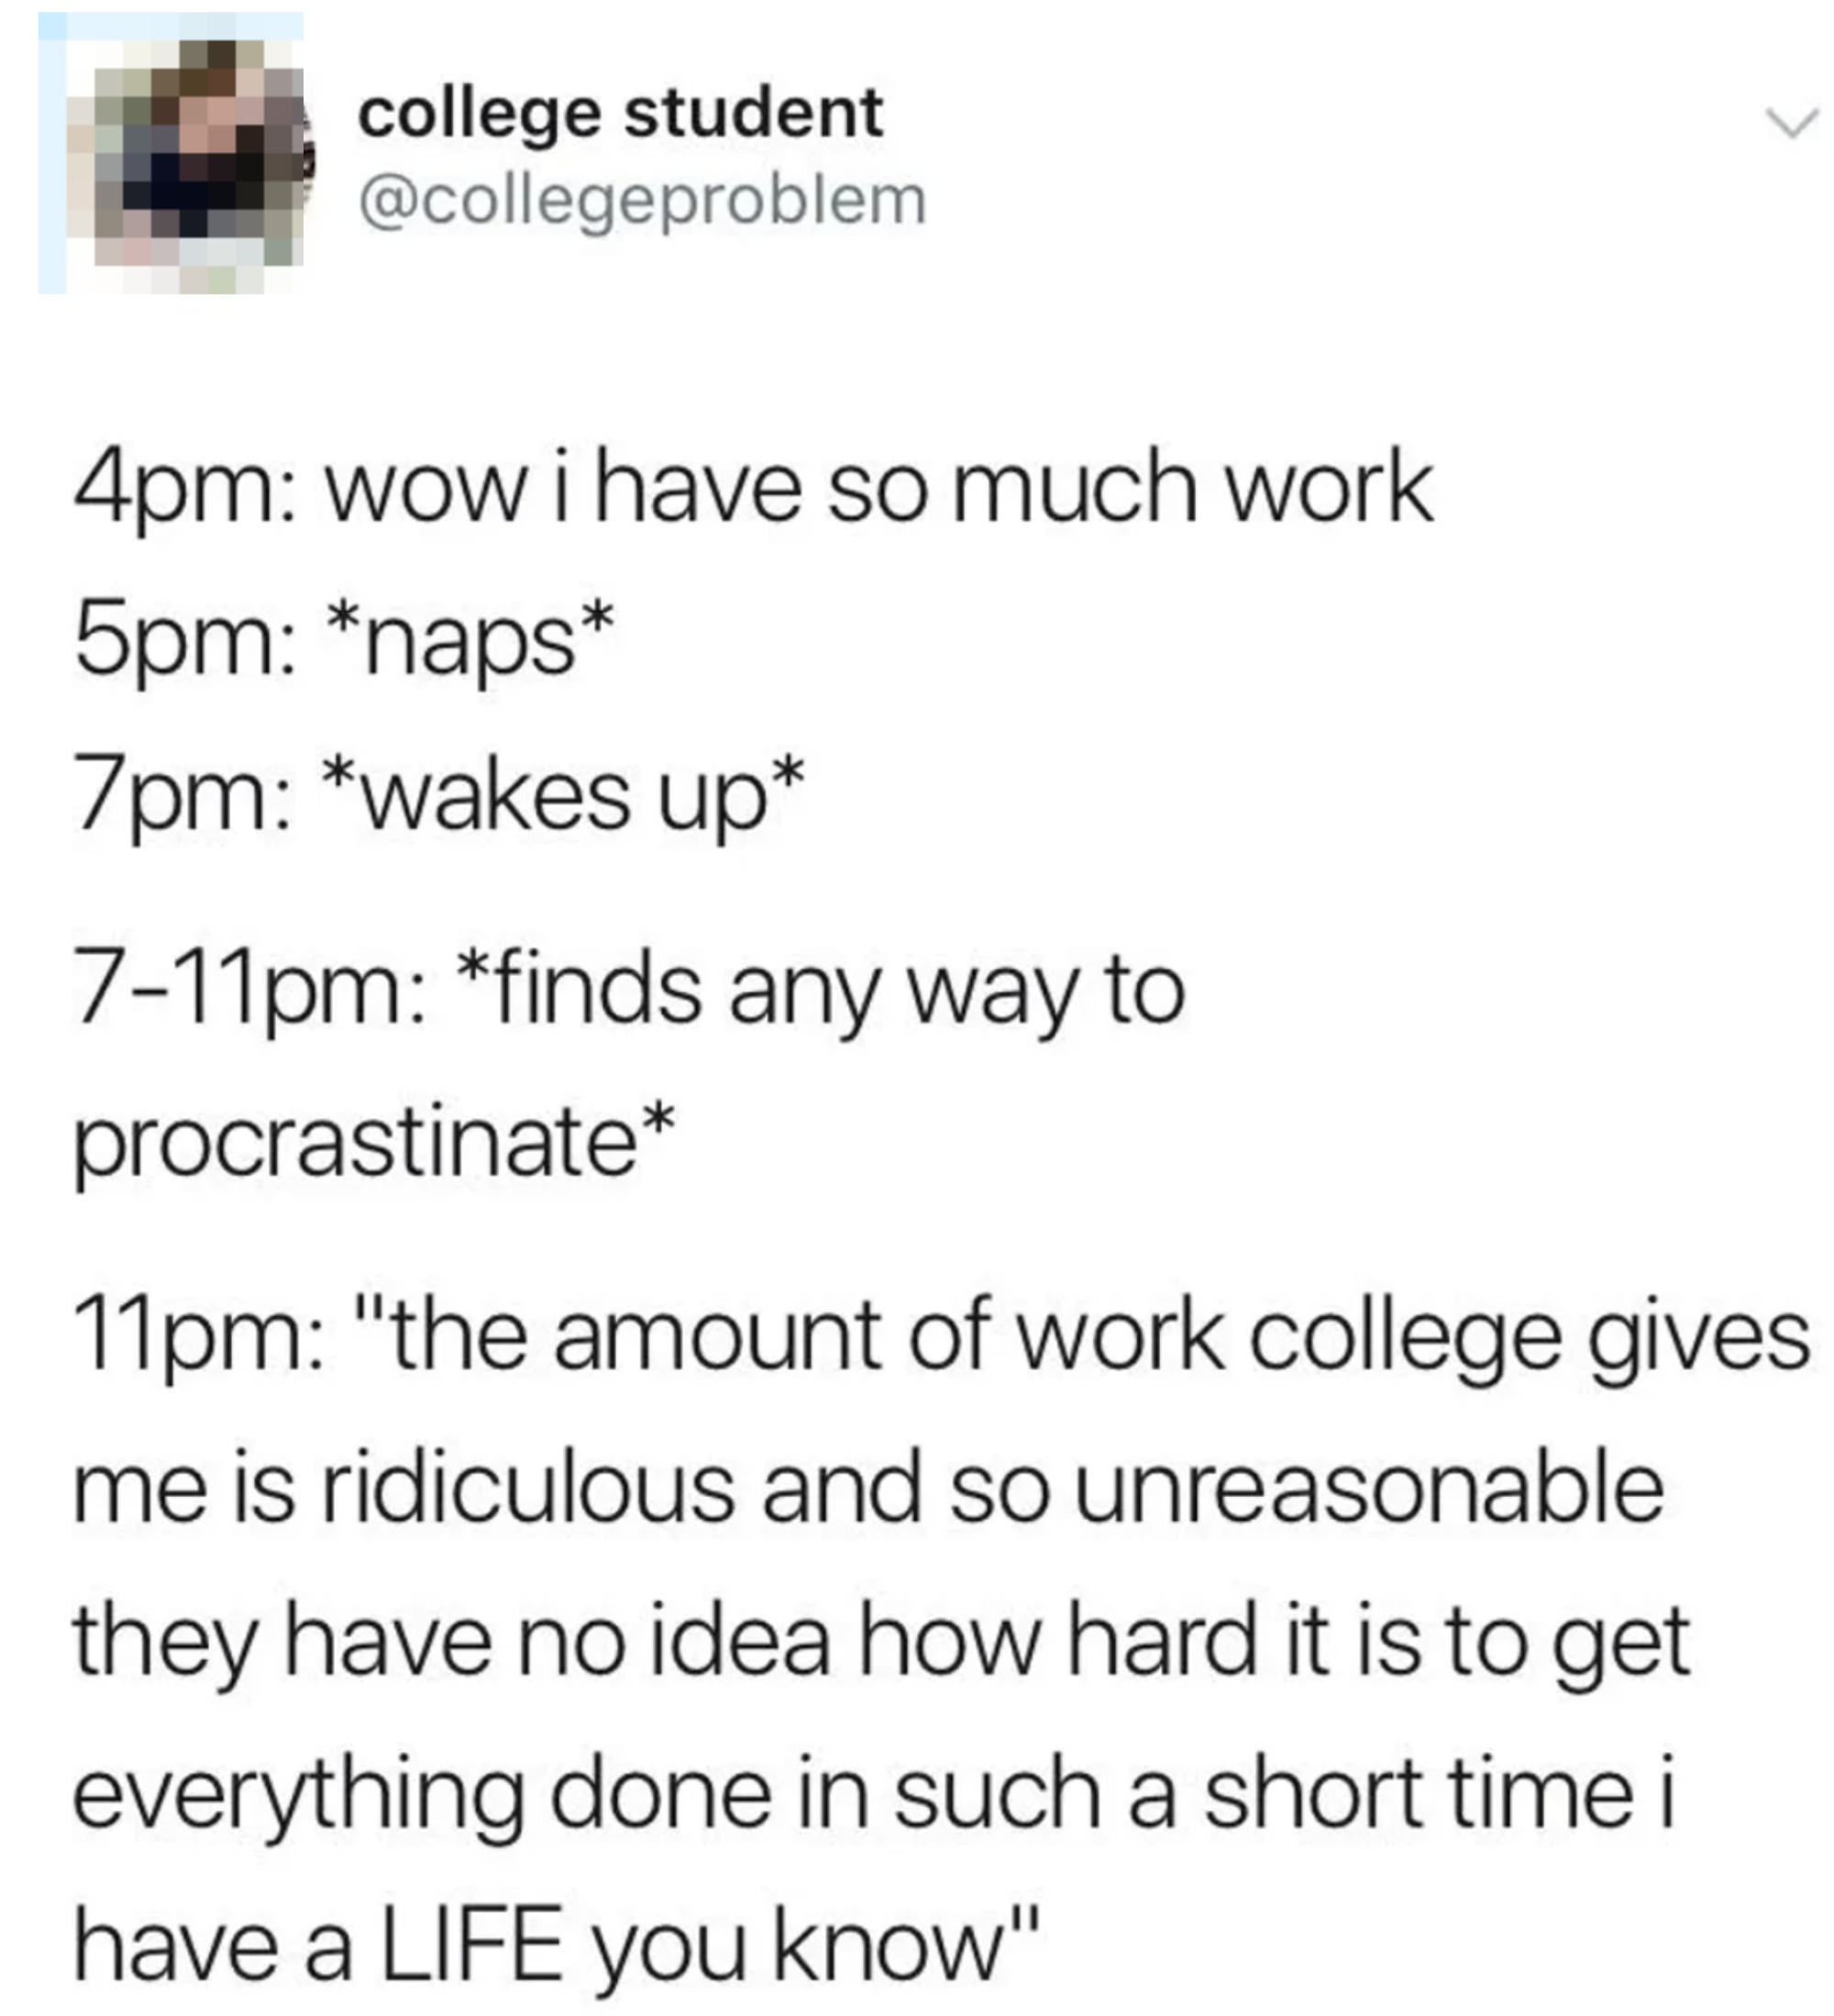 Tweet describing a college student&#x27;s procrastination schedule, from having much work at 4pm to calling it ridiculous by 11pm